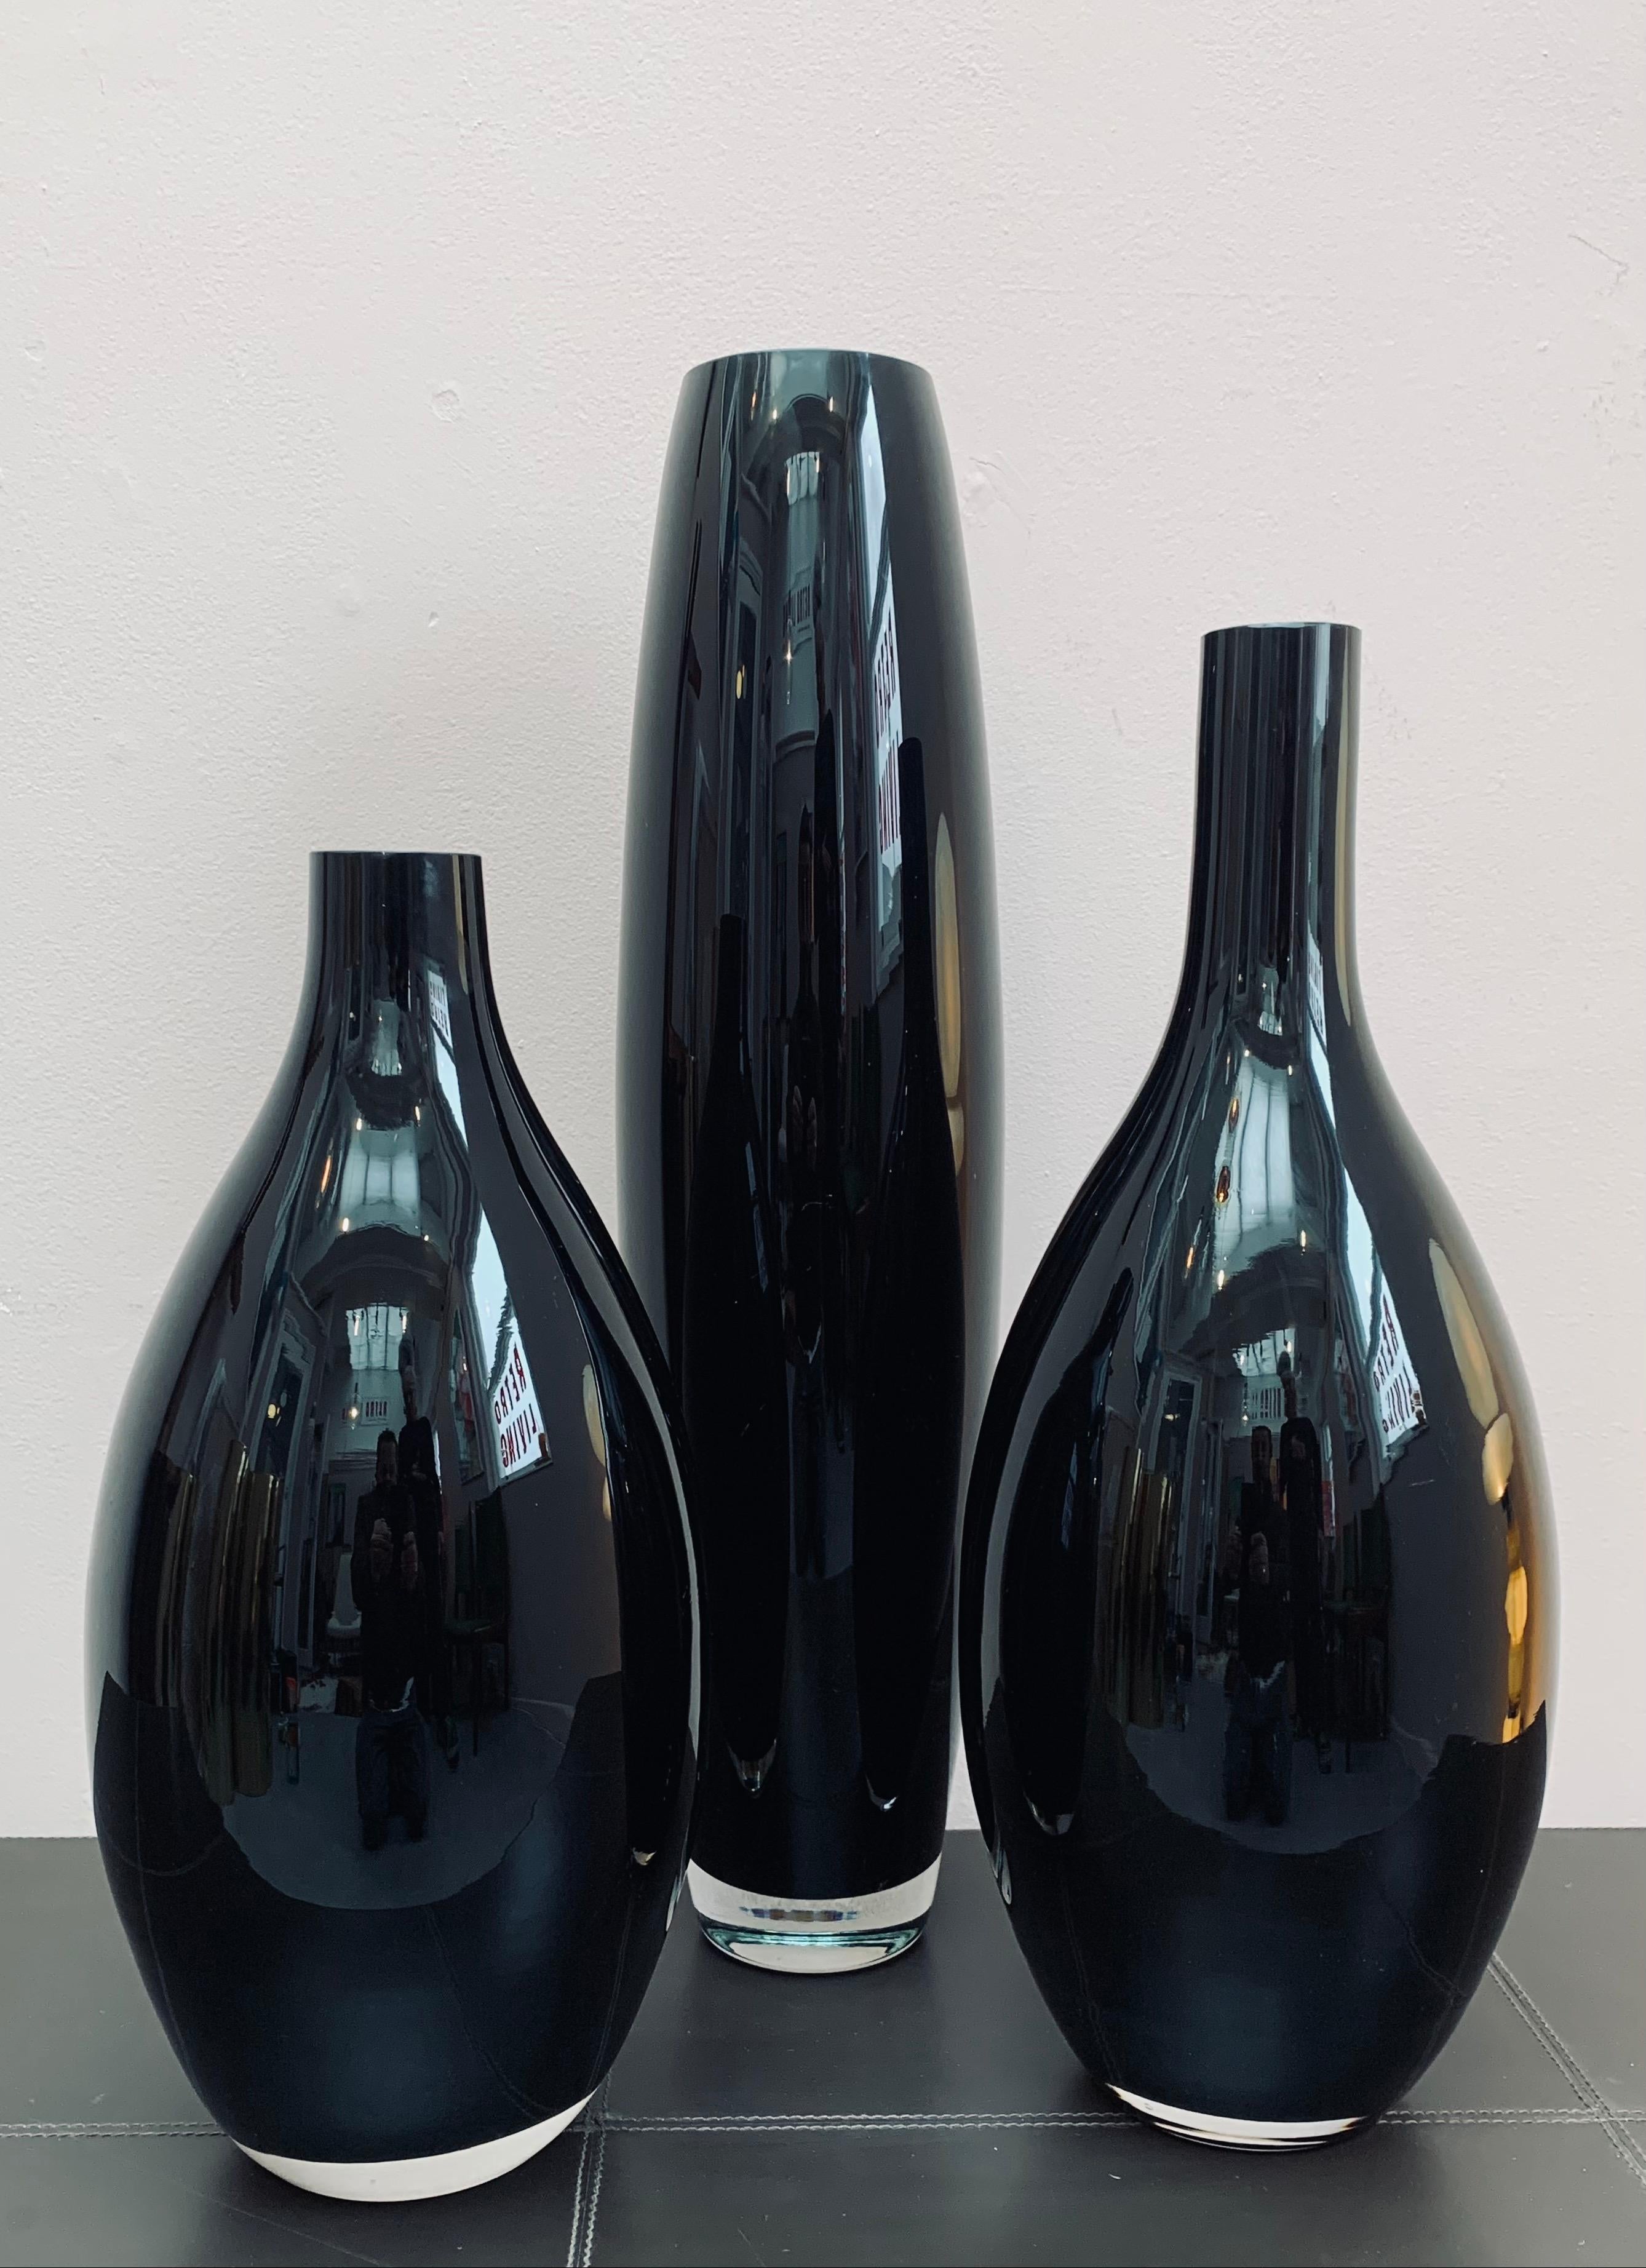 1980s set of three heavy black and clear glass vases of different sizes and proportions which look striking together. Made in England. Some small surface scratches but not particularly noticeable. No chips or cracks. Their bodies are made from black